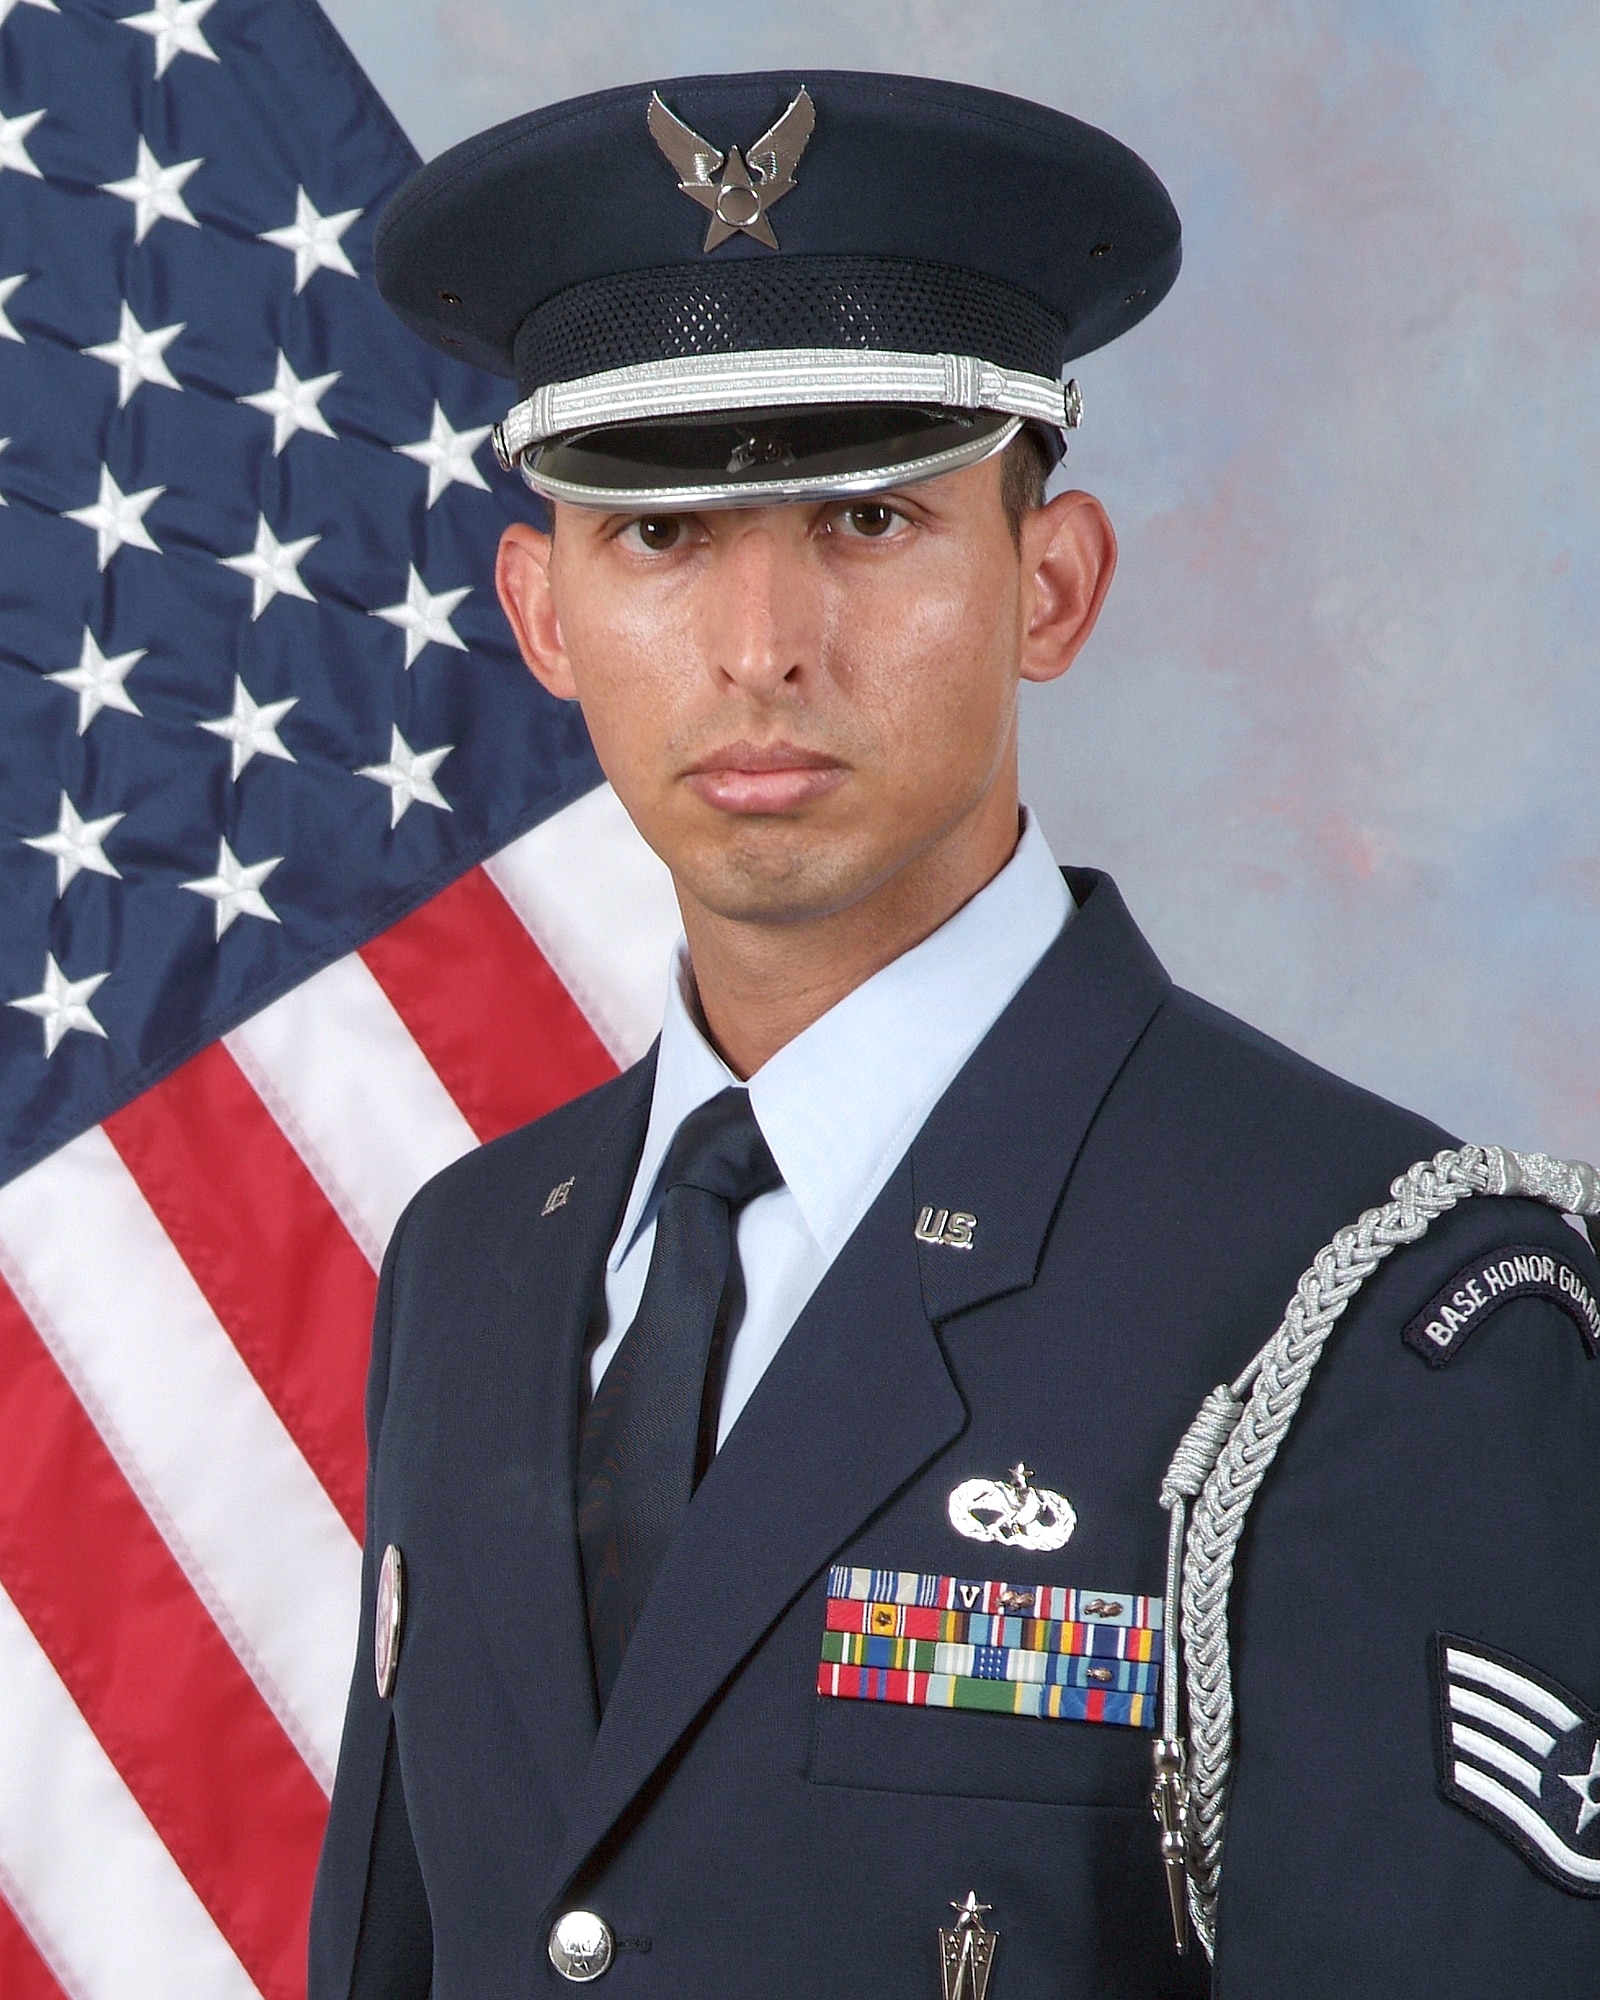 Staff Sgt. Jesus Canales, 56th Services Squadron honor guard